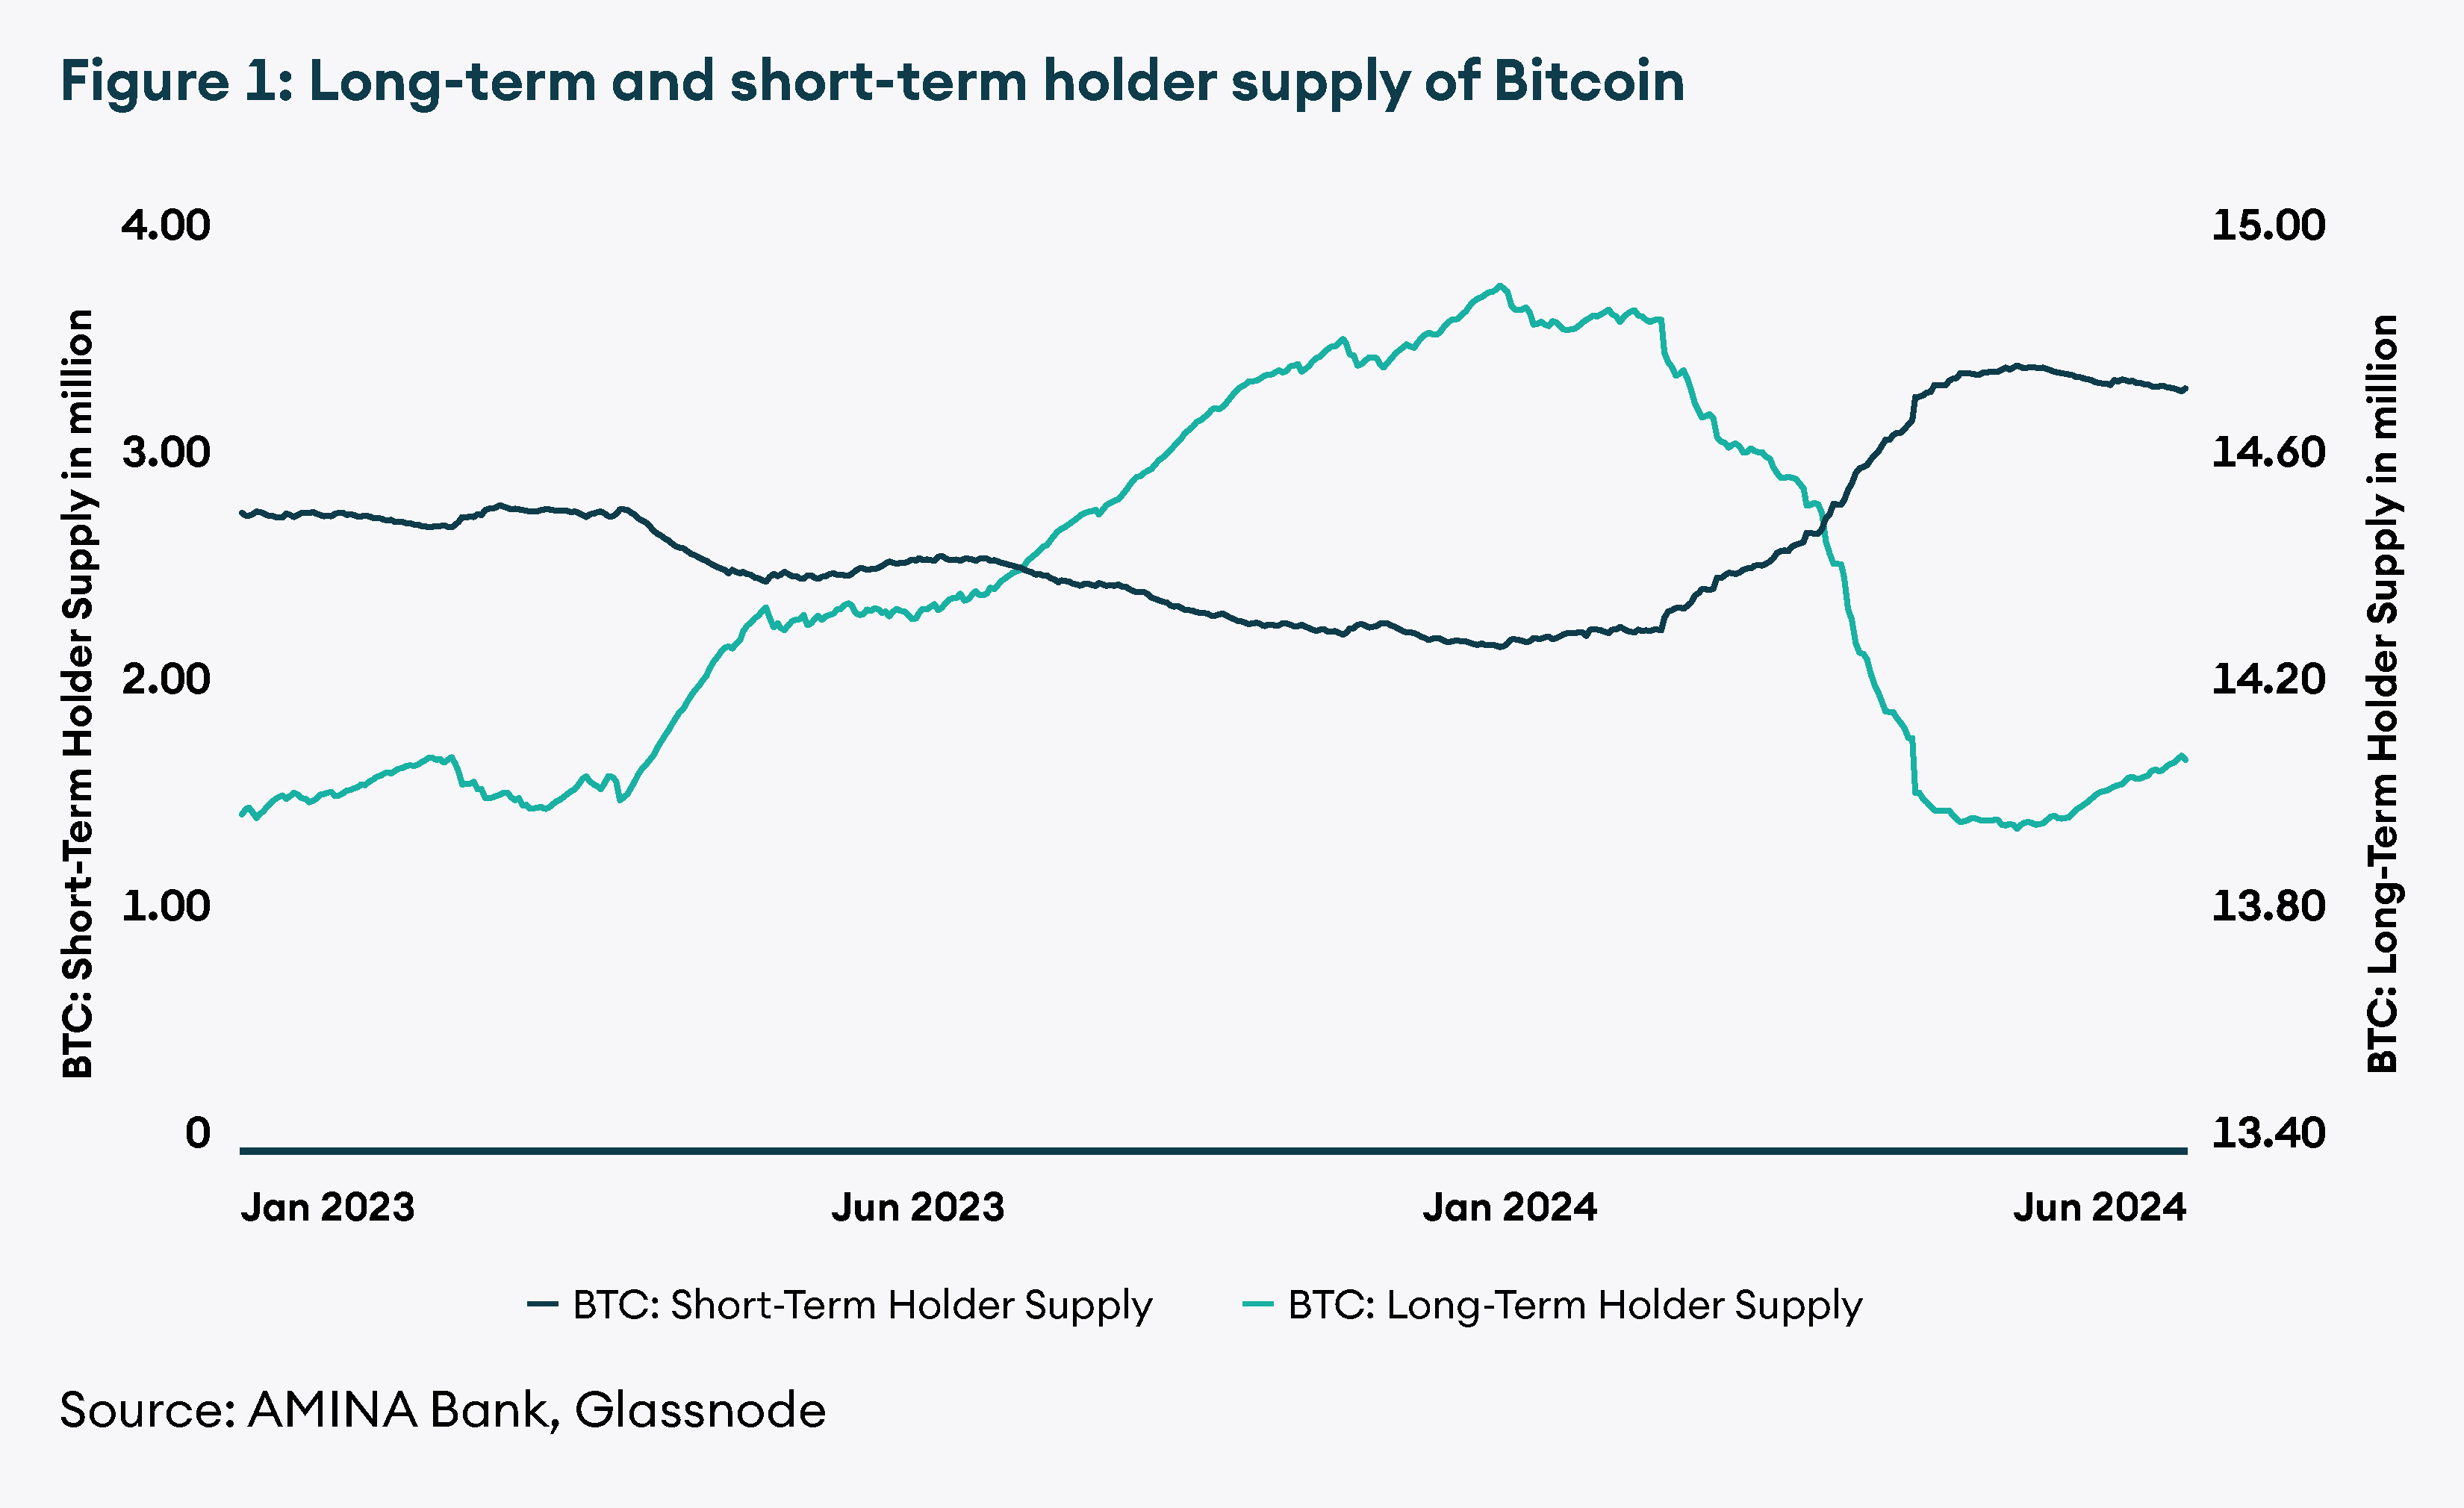 Long-term and short-term holder supply of Bitcoin